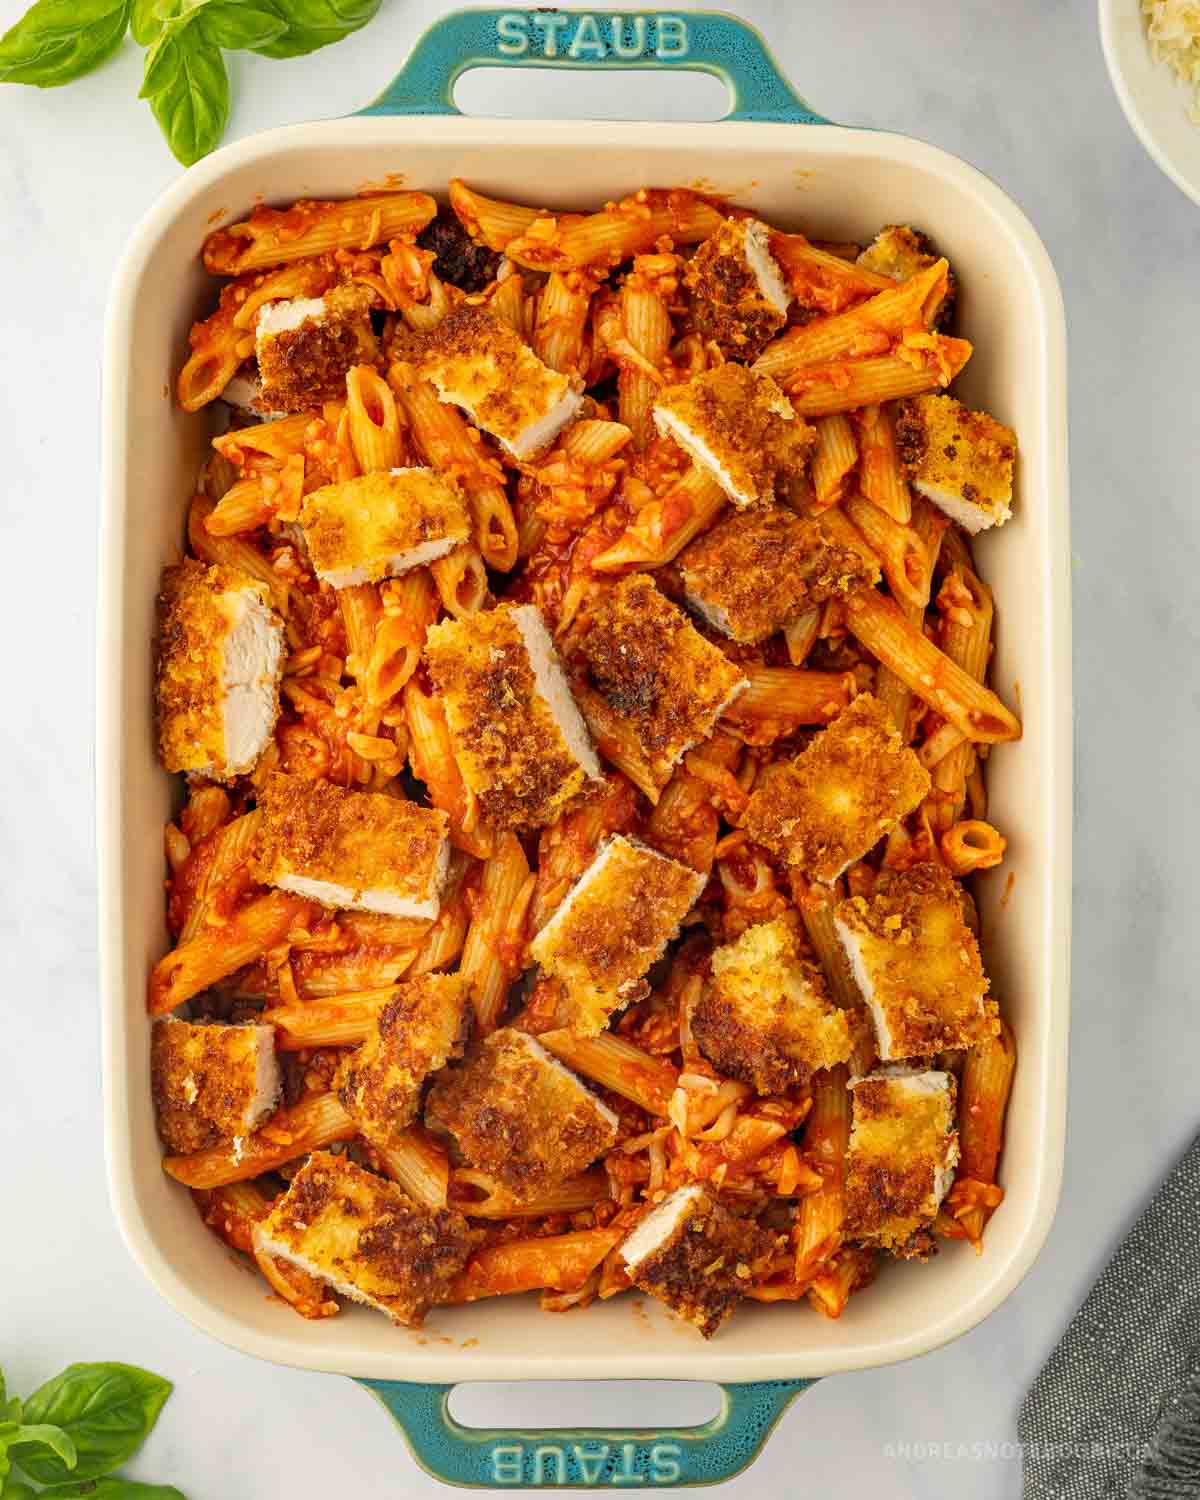 Casserole dish with chicken bites on top of penne pasta.